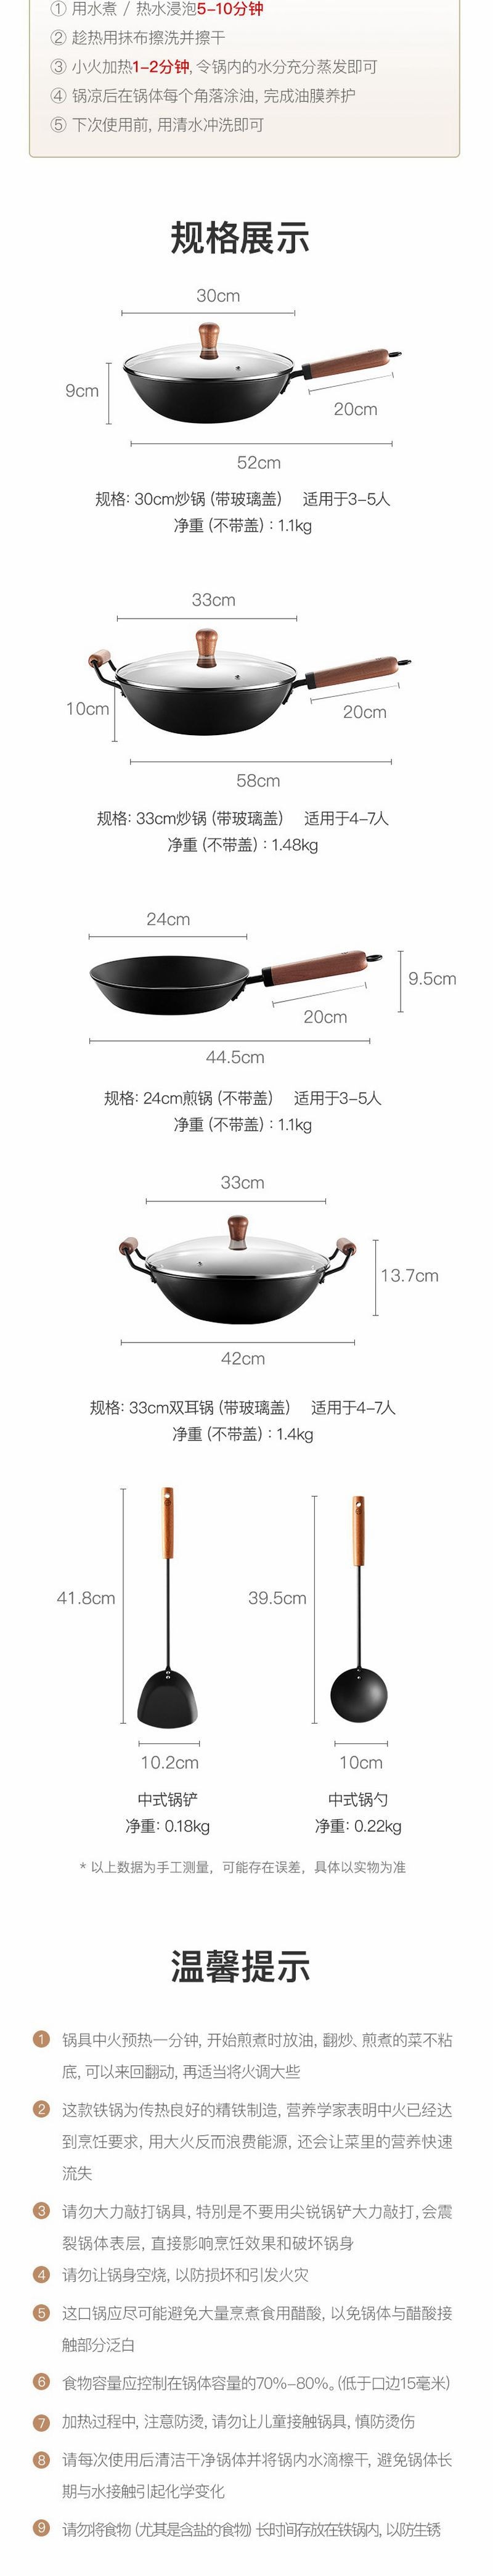 Chinese Carbon Steel Wok - Rust-proof &Uncoated iron pan [5-7 Days U.S. Shipping]